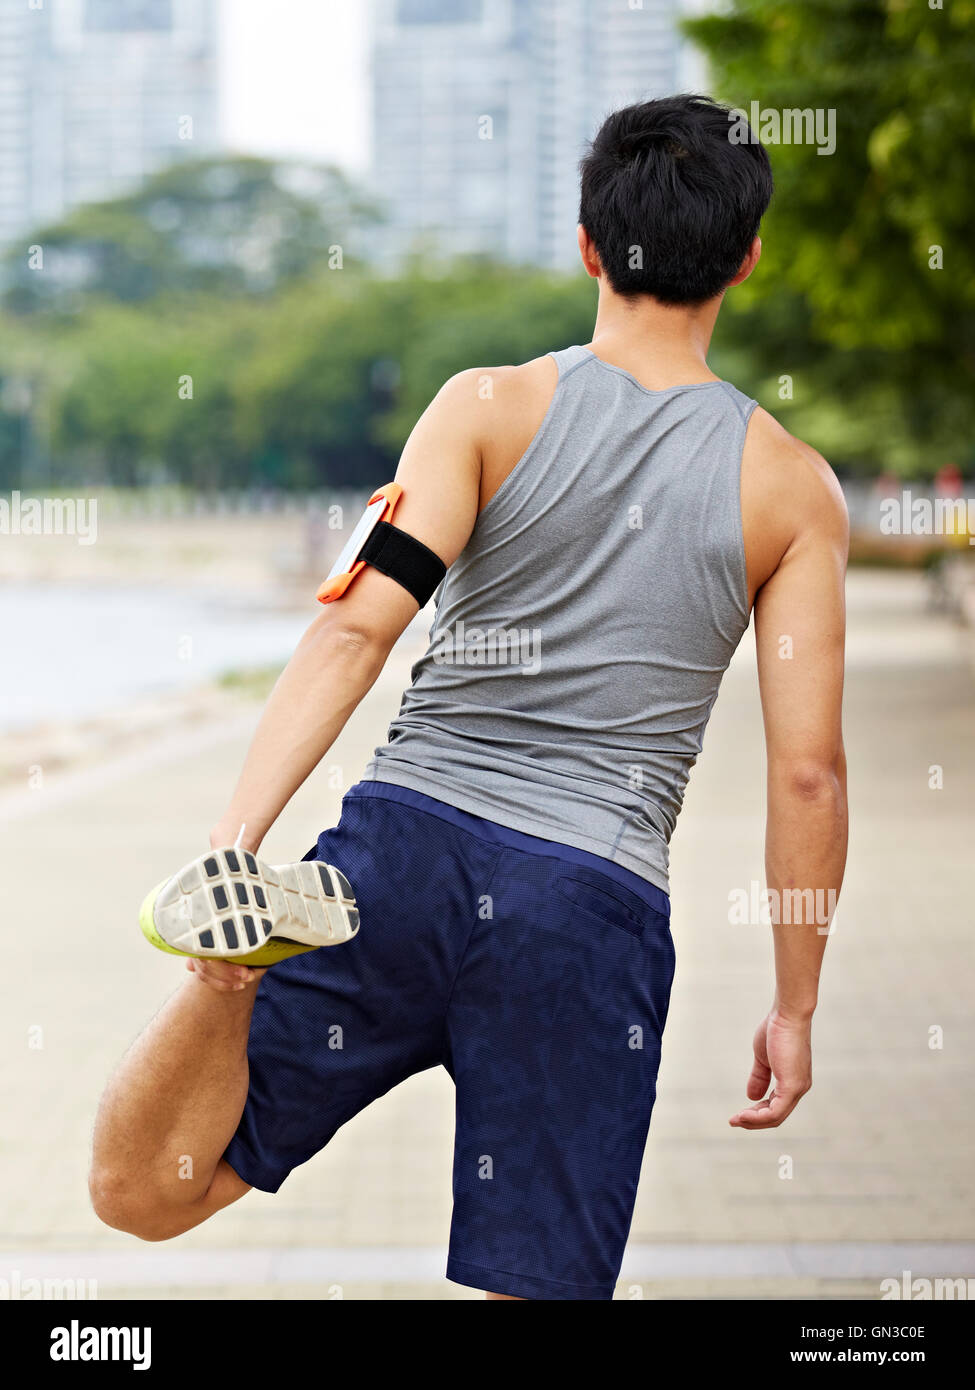 young asian male jogger with fitness tracker attached to arm warming up by stretching leg before running. Stock Photo